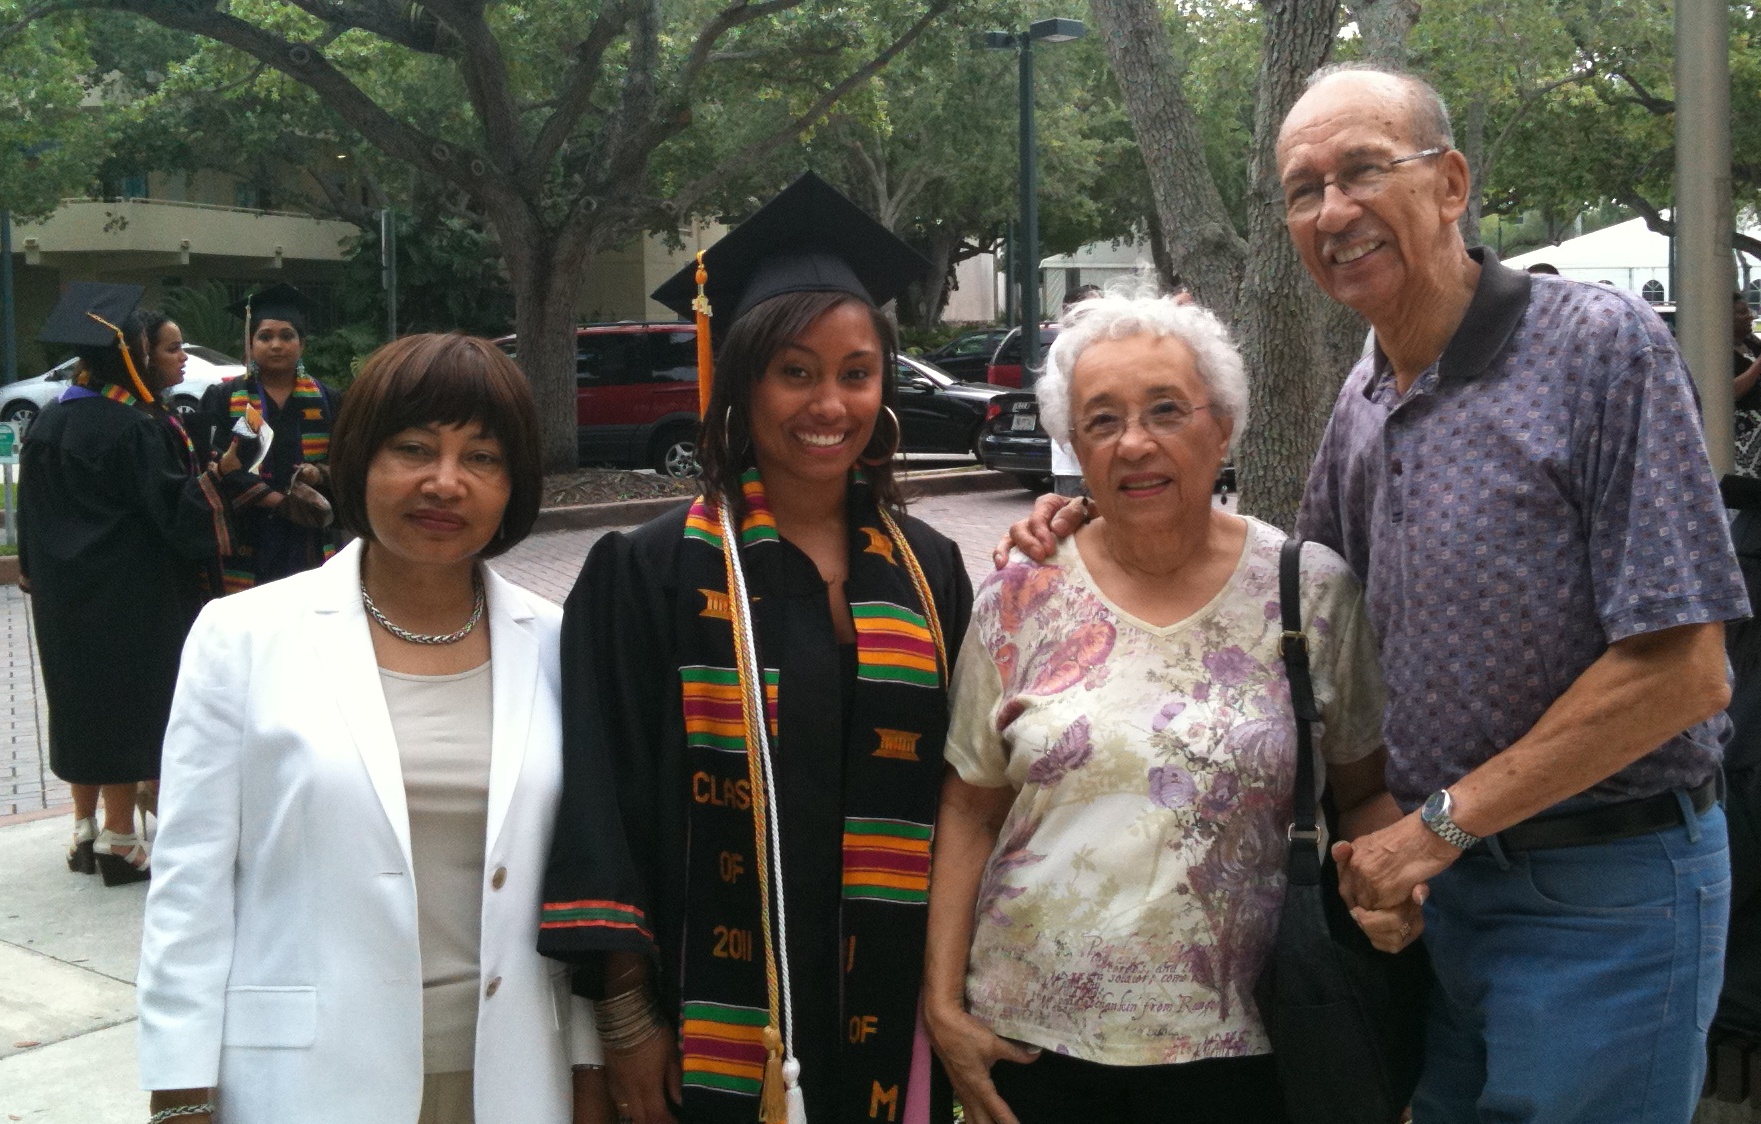 William Fletcher Sr. (right) with his wife, granddaughter, and daughter-in-law.